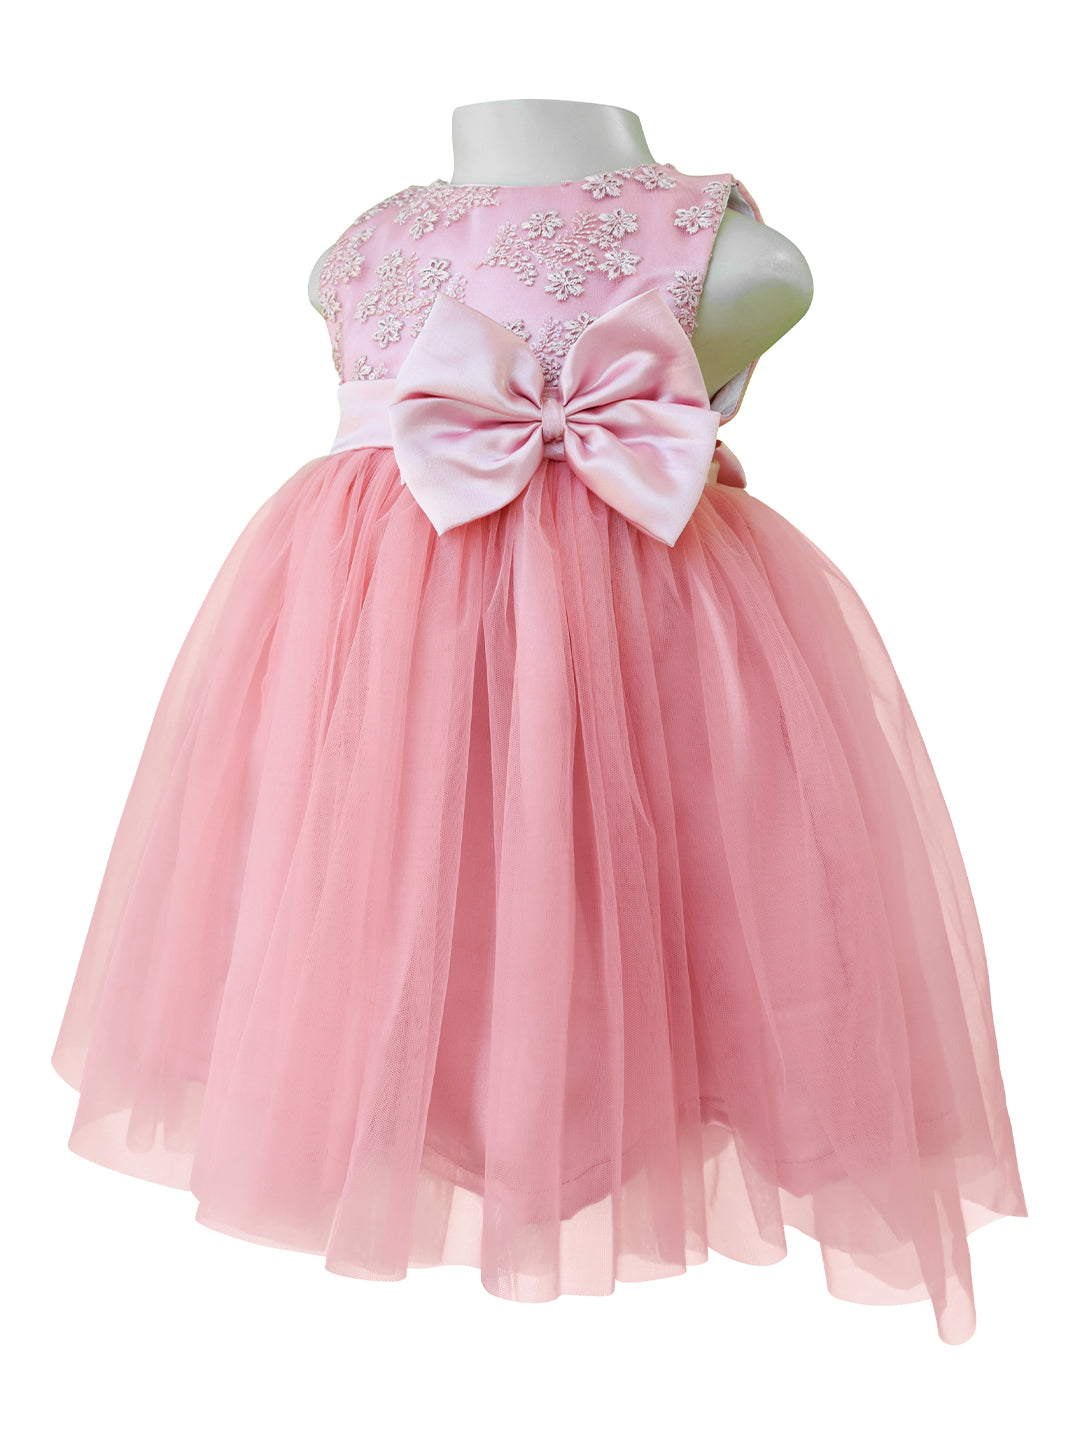 Dolly Cowgirl Birthday Dress | Cora and Violet